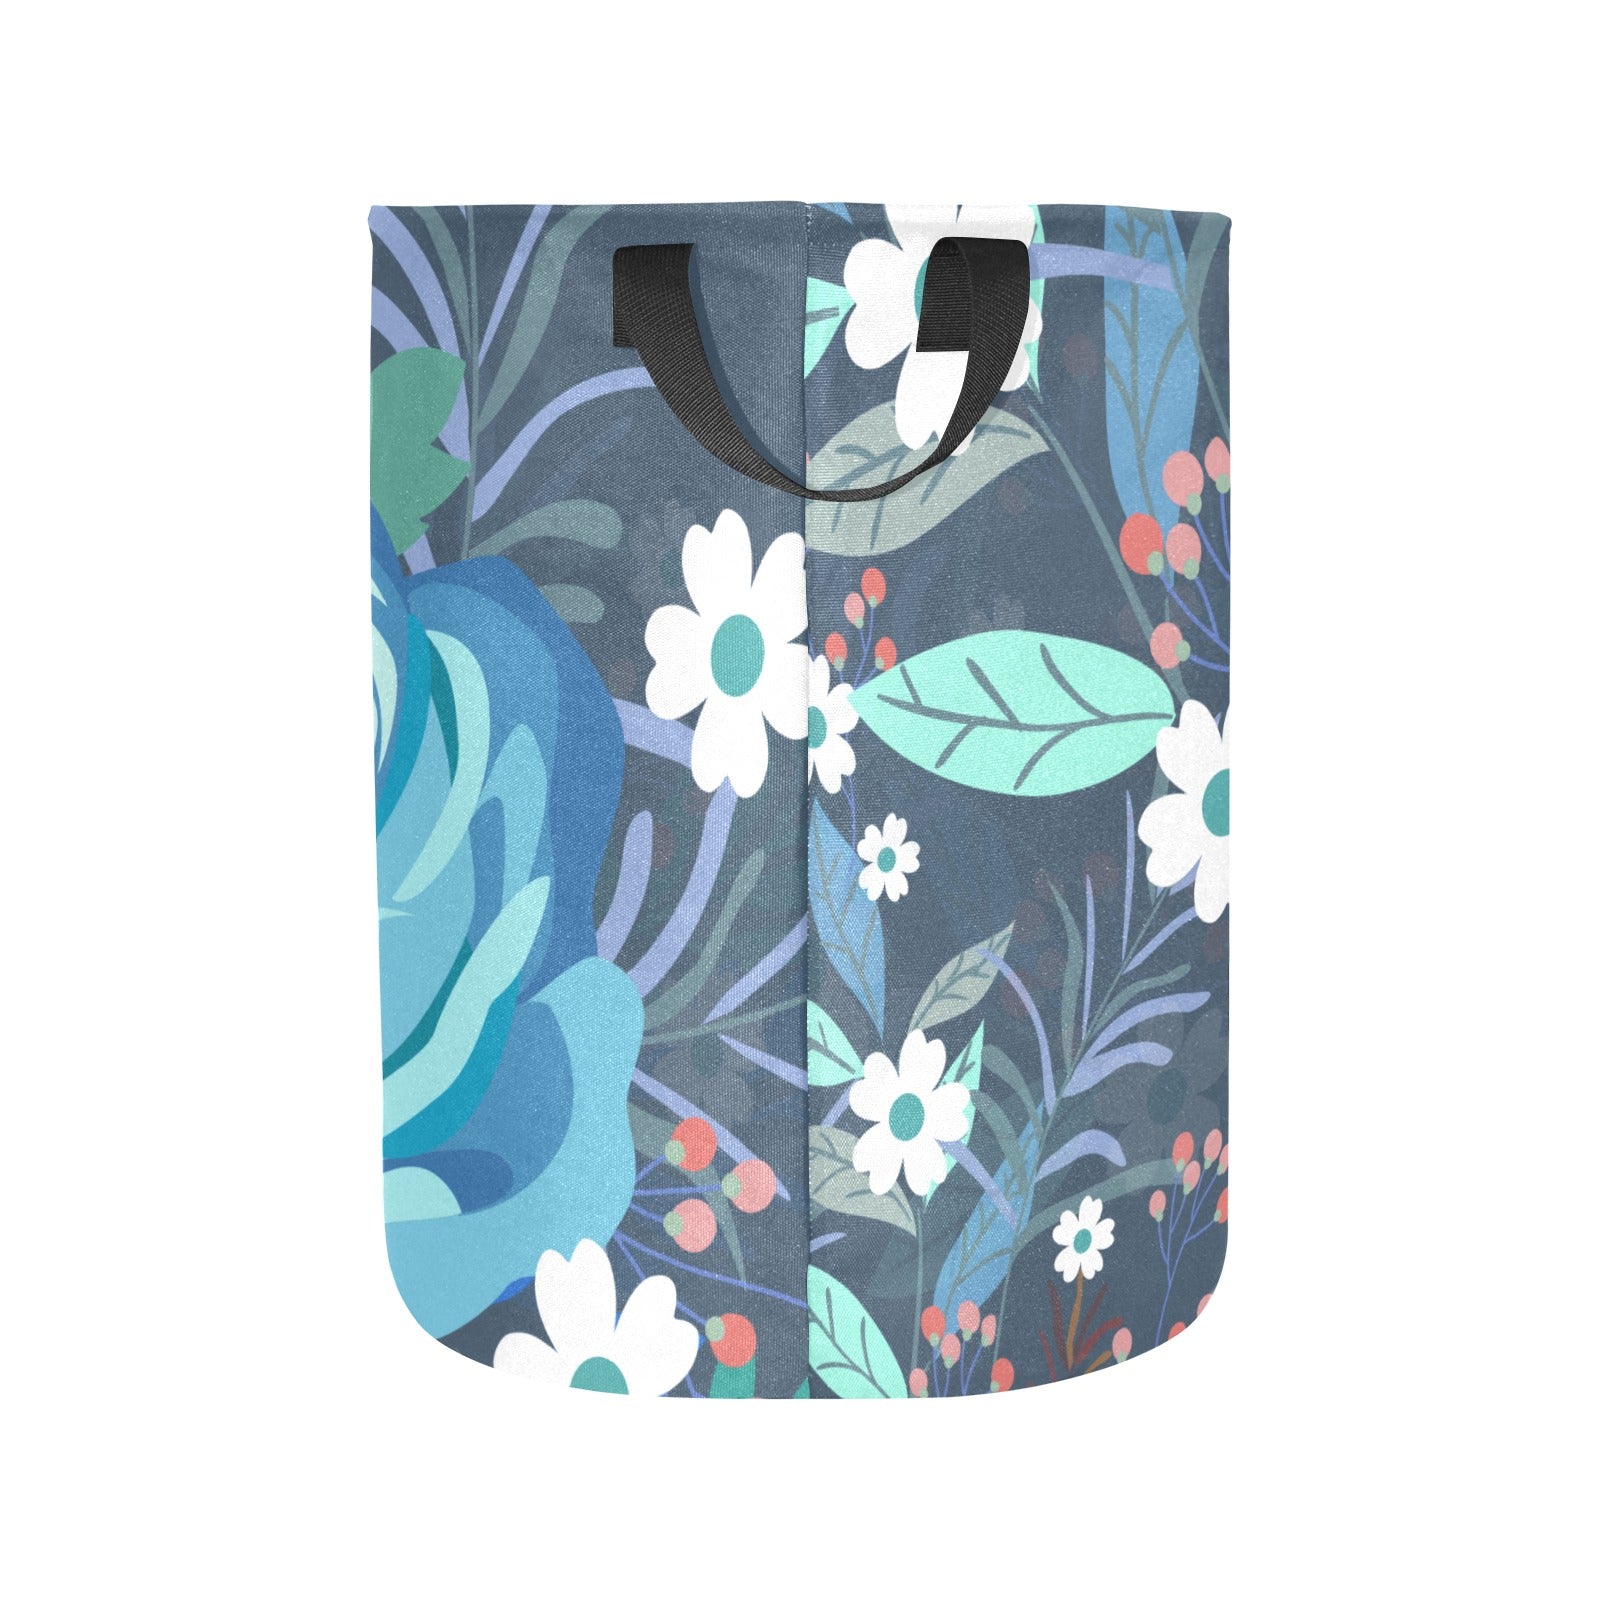 Blue Floral Laundry Bag - Laundry Bag (Large) - Zanlana Design and Home Decor